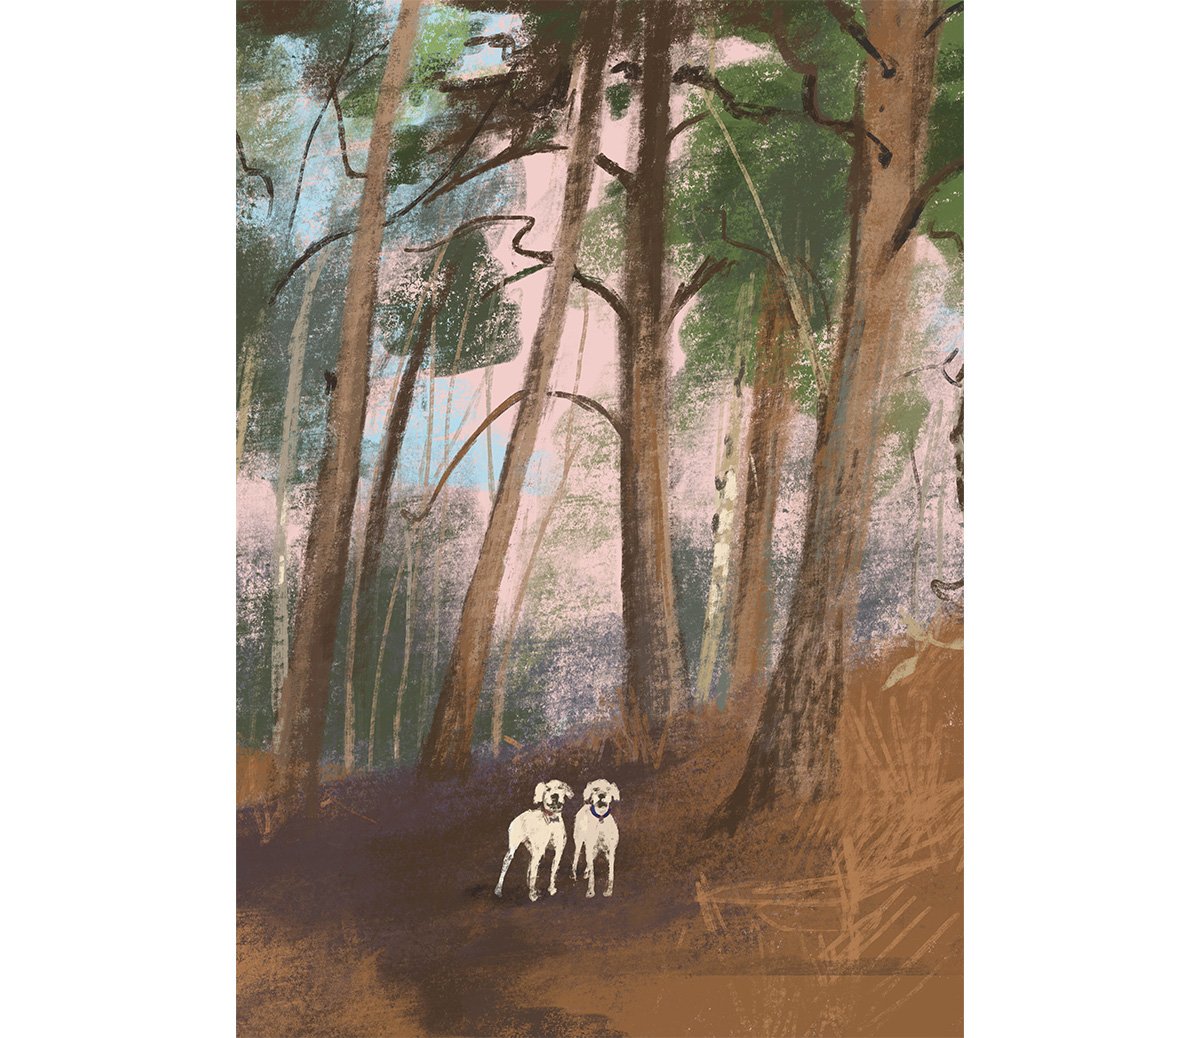 jenny-bloomfield-two-dogs-in-the-woods-illustration.jpg